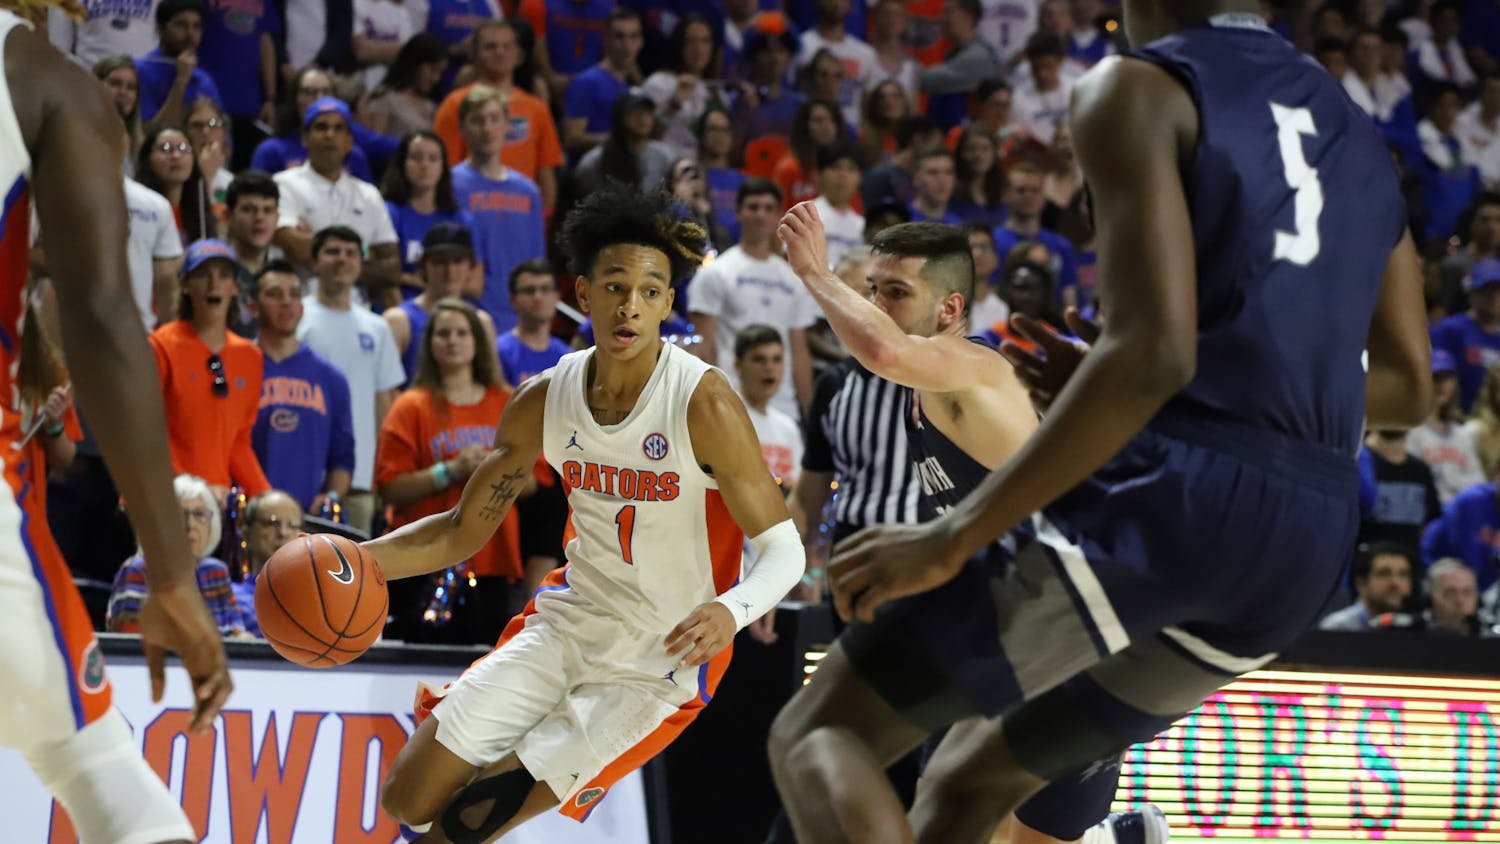 Gators guard Tre Mann finished with 17 points and eight rebounds, willing Florida to a comeback victory on Tuesday against Ole Miss